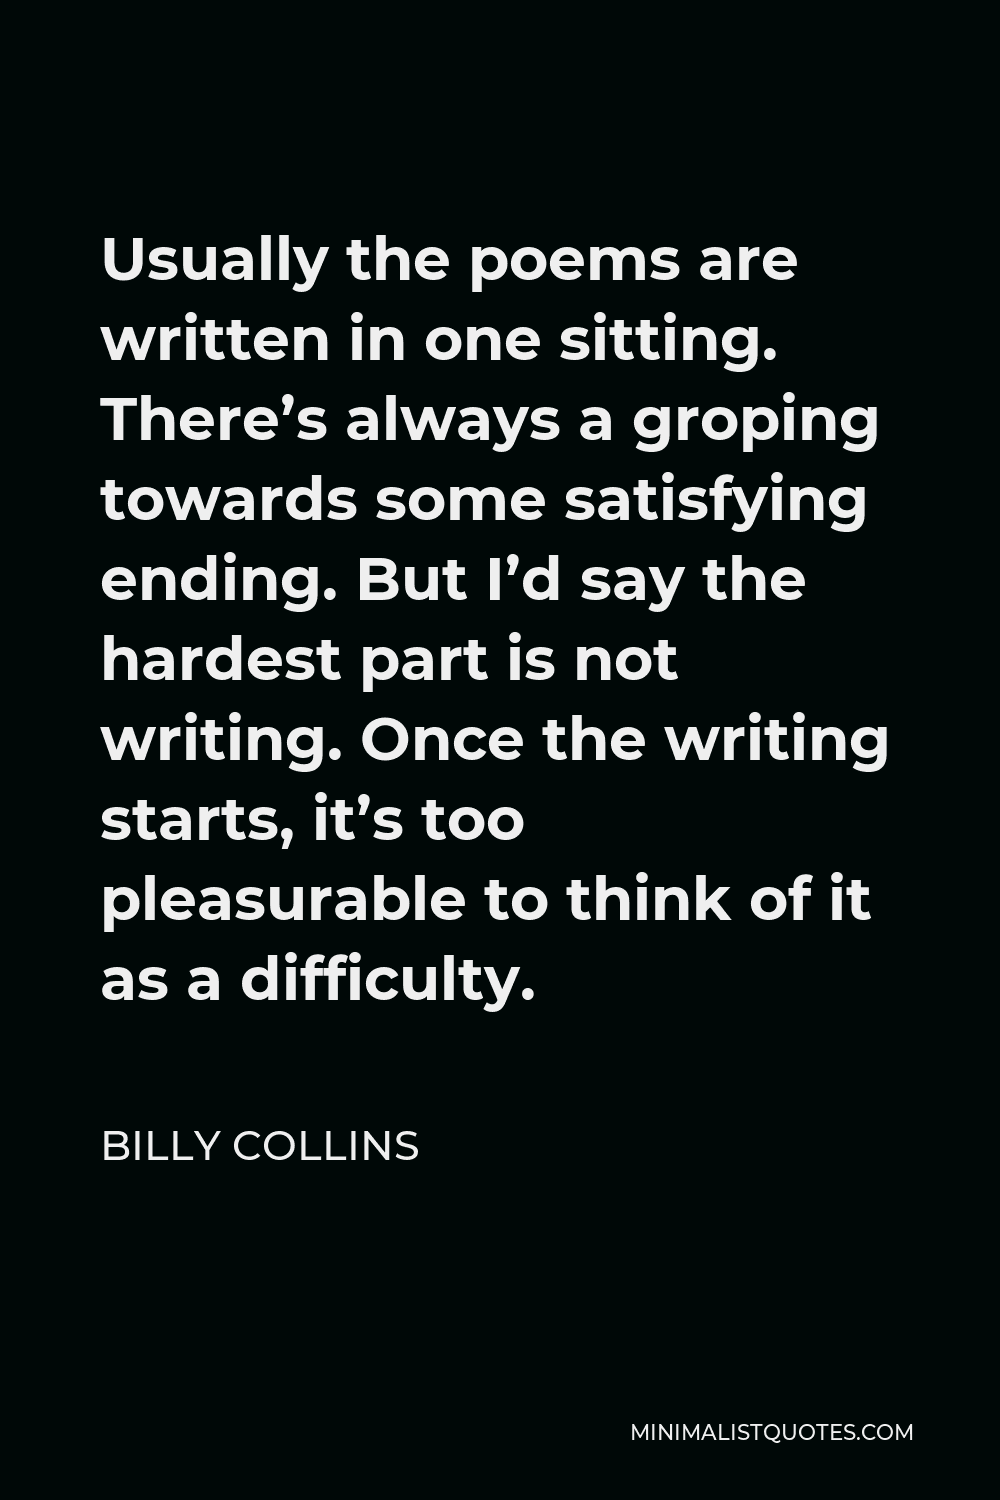 Billy Collins Quote - Usually the poems are written in one sitting. There’s always a groping towards some satisfying ending. But I’d say the hardest part is not writing. Once the writing starts, it’s too pleasurable to think of it as a difficulty.